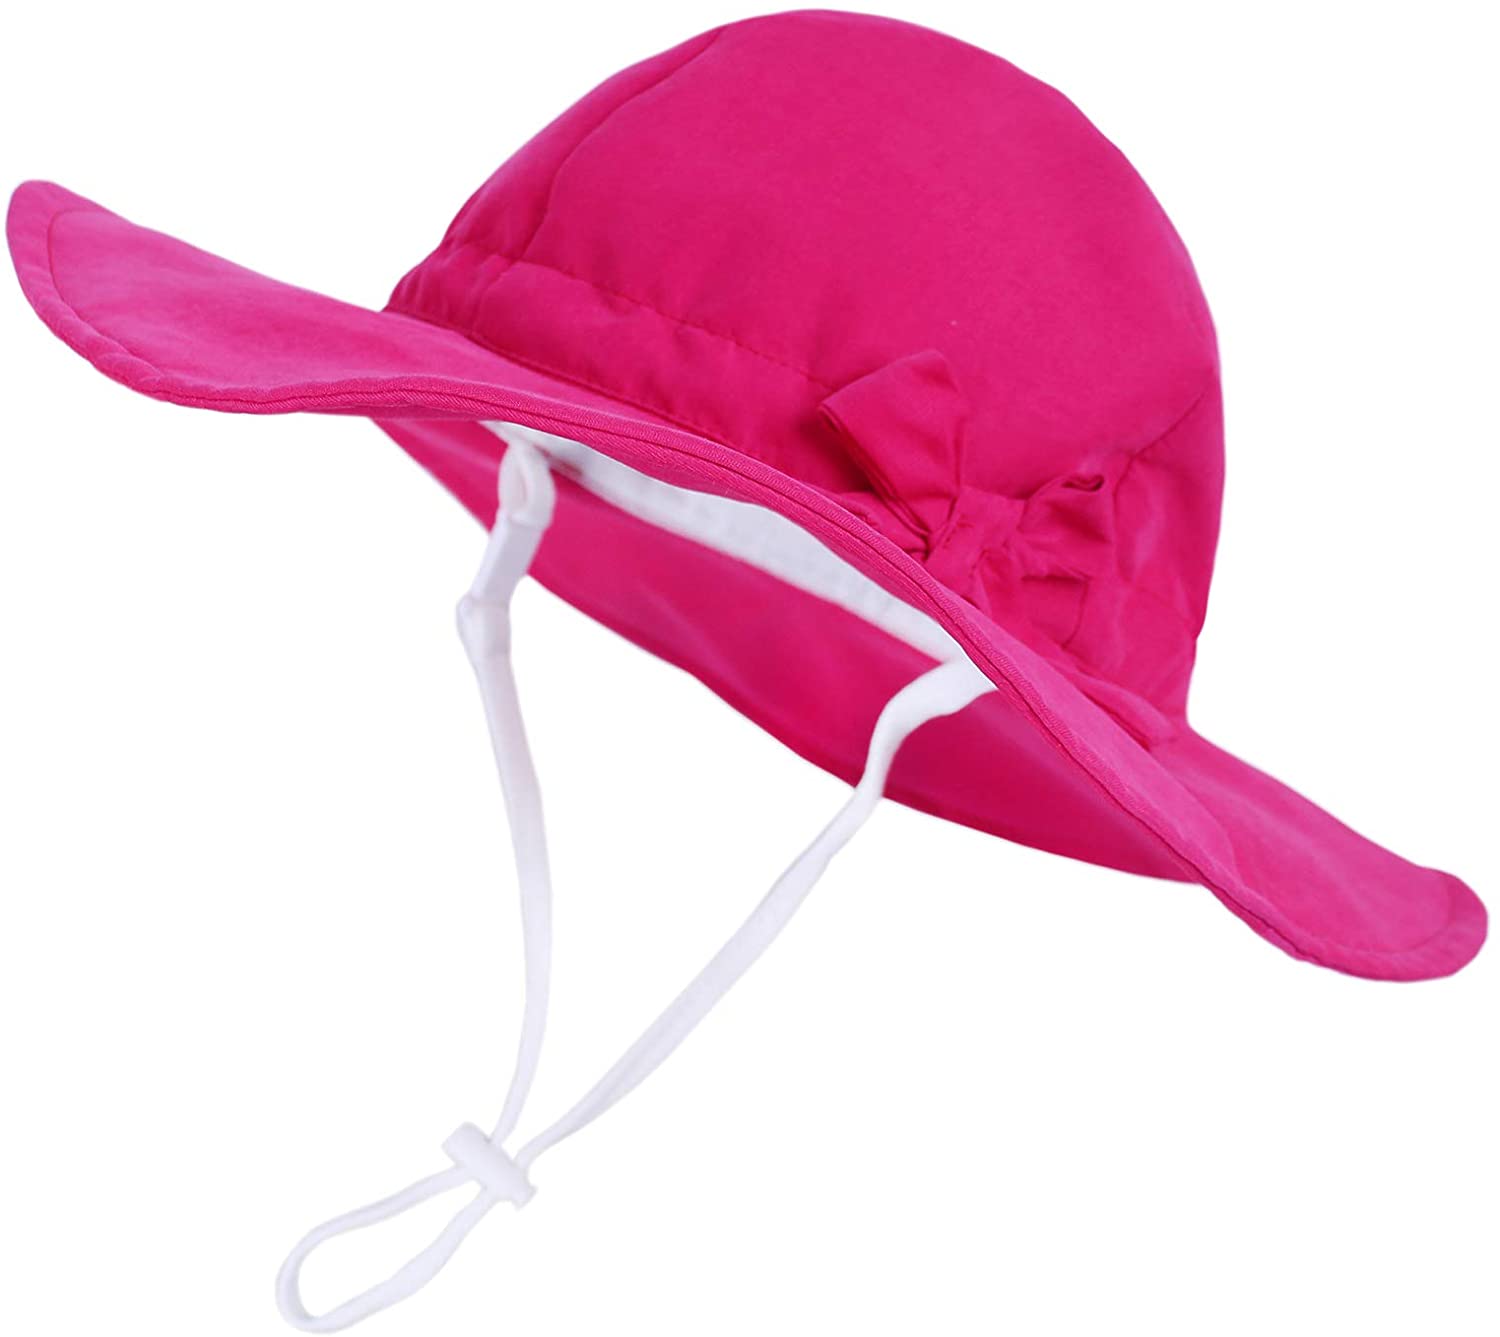 Sun Protection Beach Flap Hat with Wide Brim Baby Boys Girls Sun Hat Toddler Adjustable Summer UPF 50 